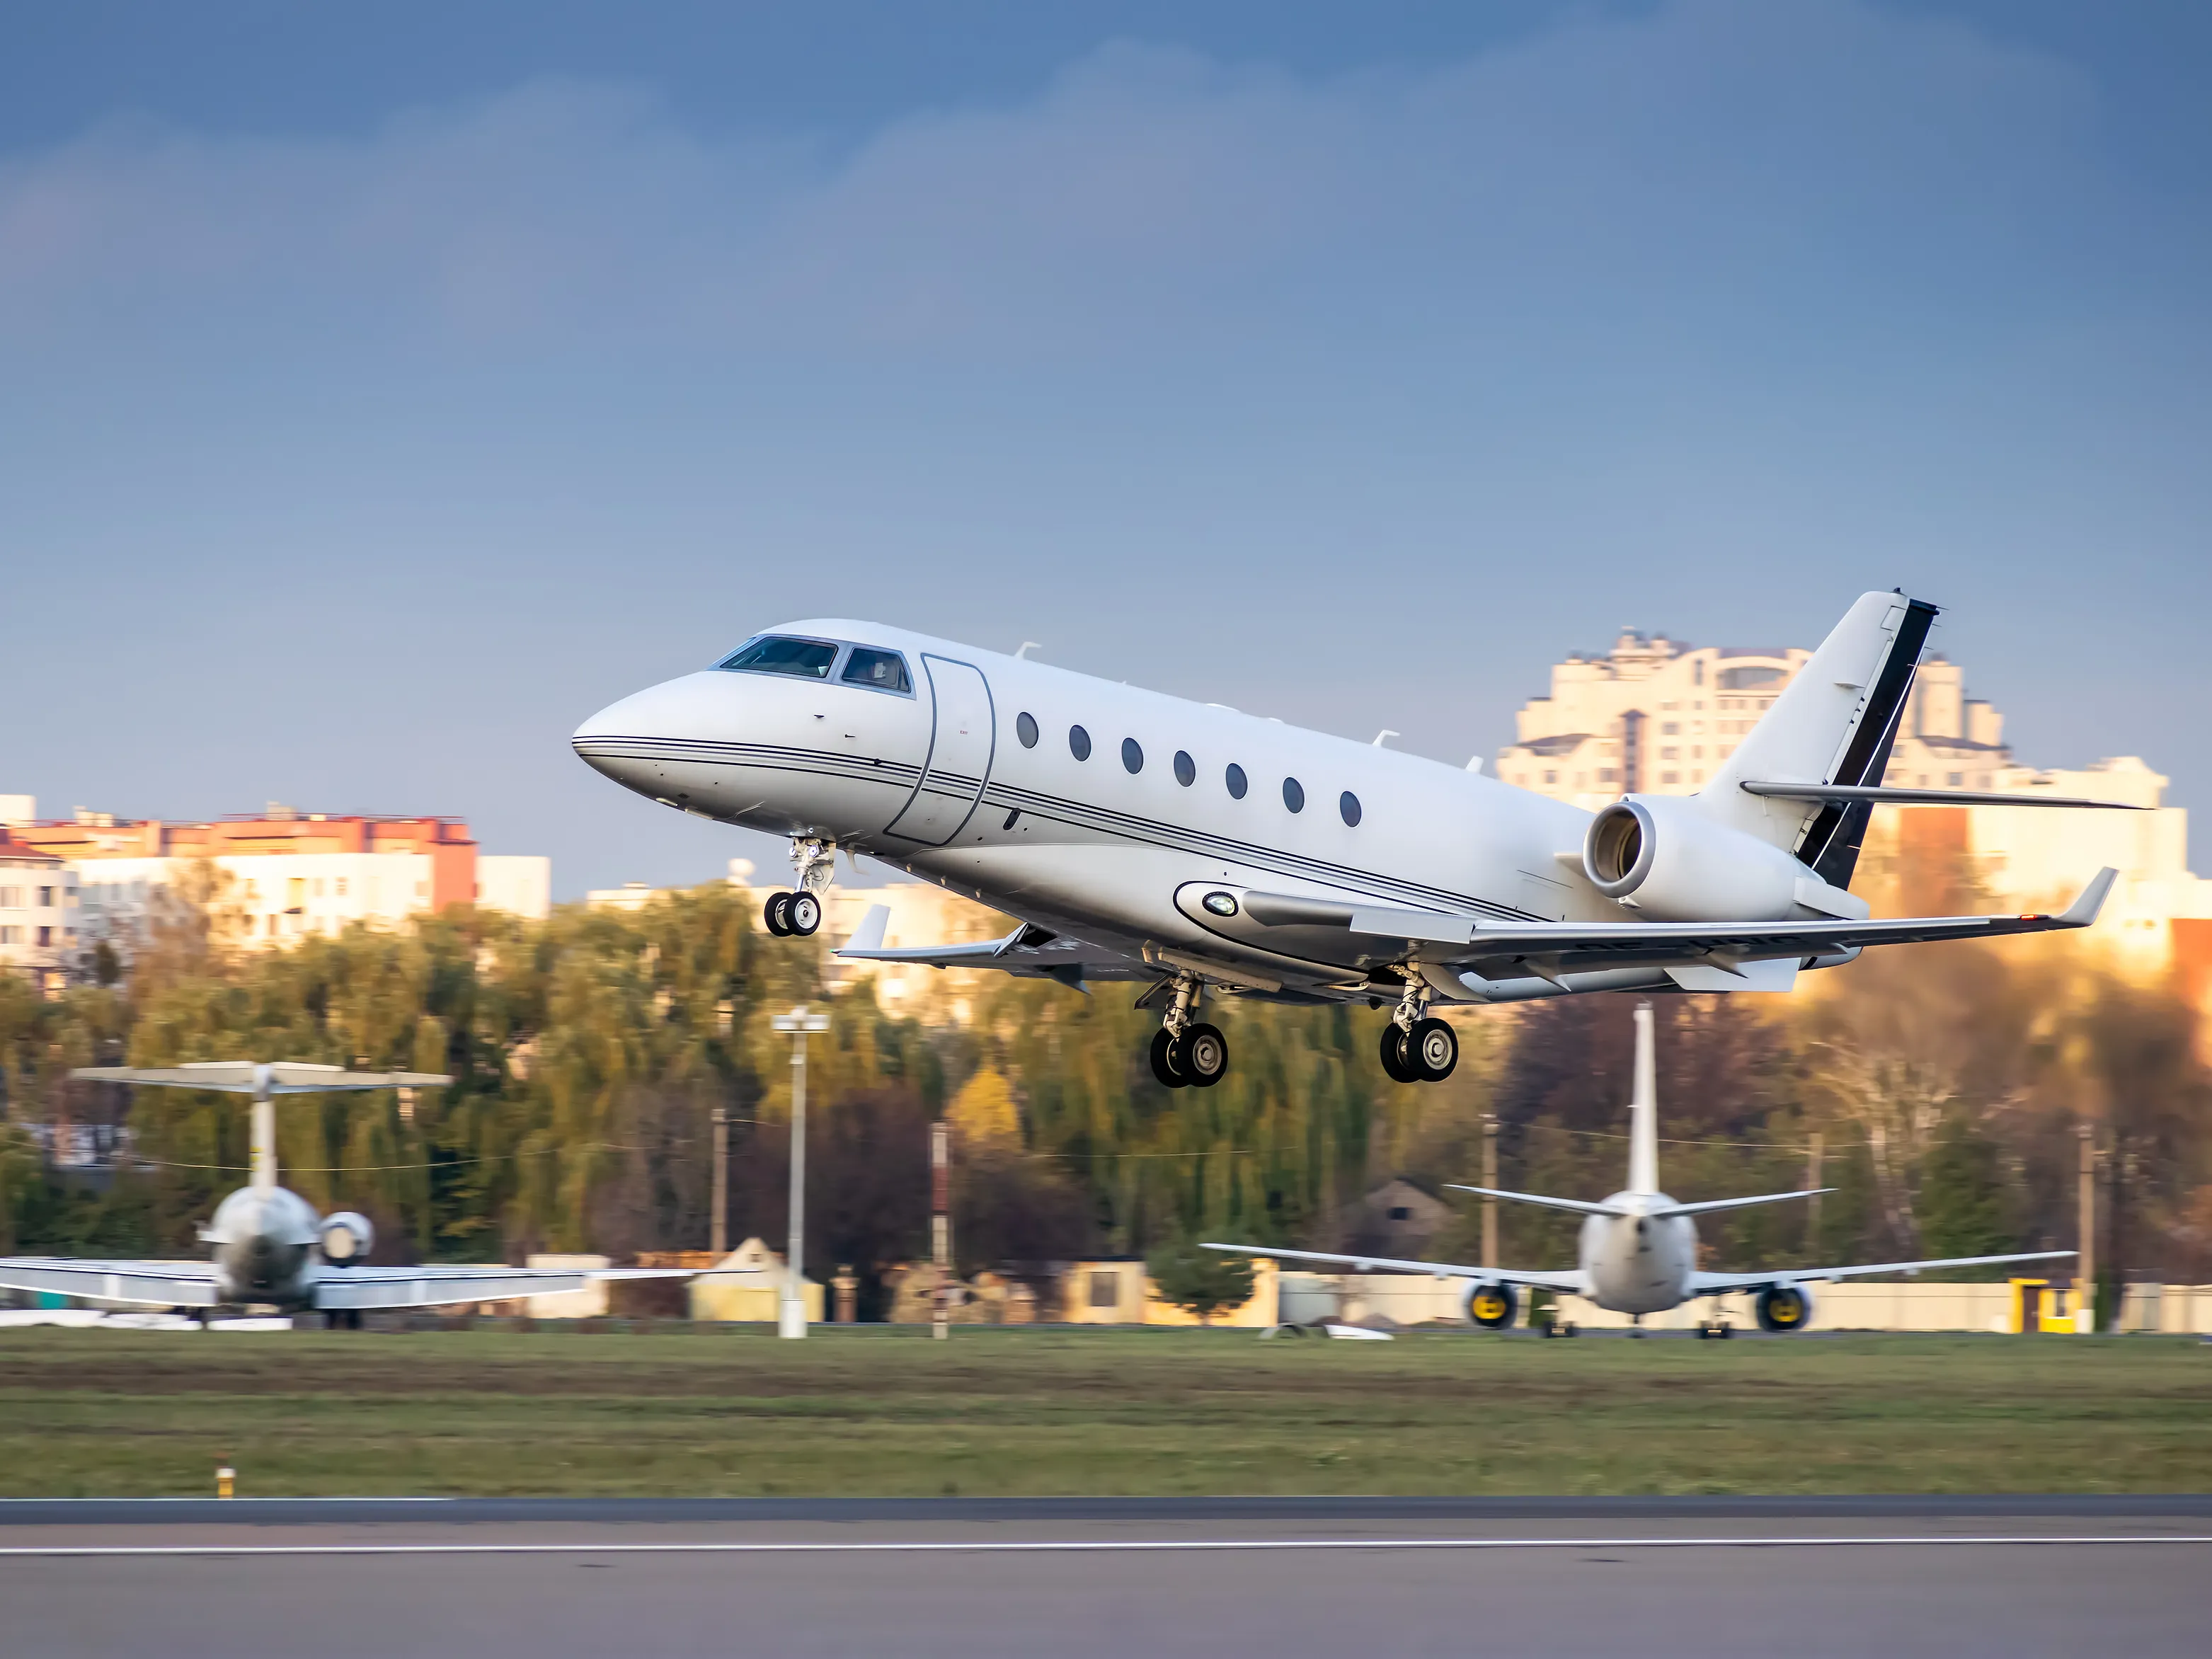 A business jet taking off, side view